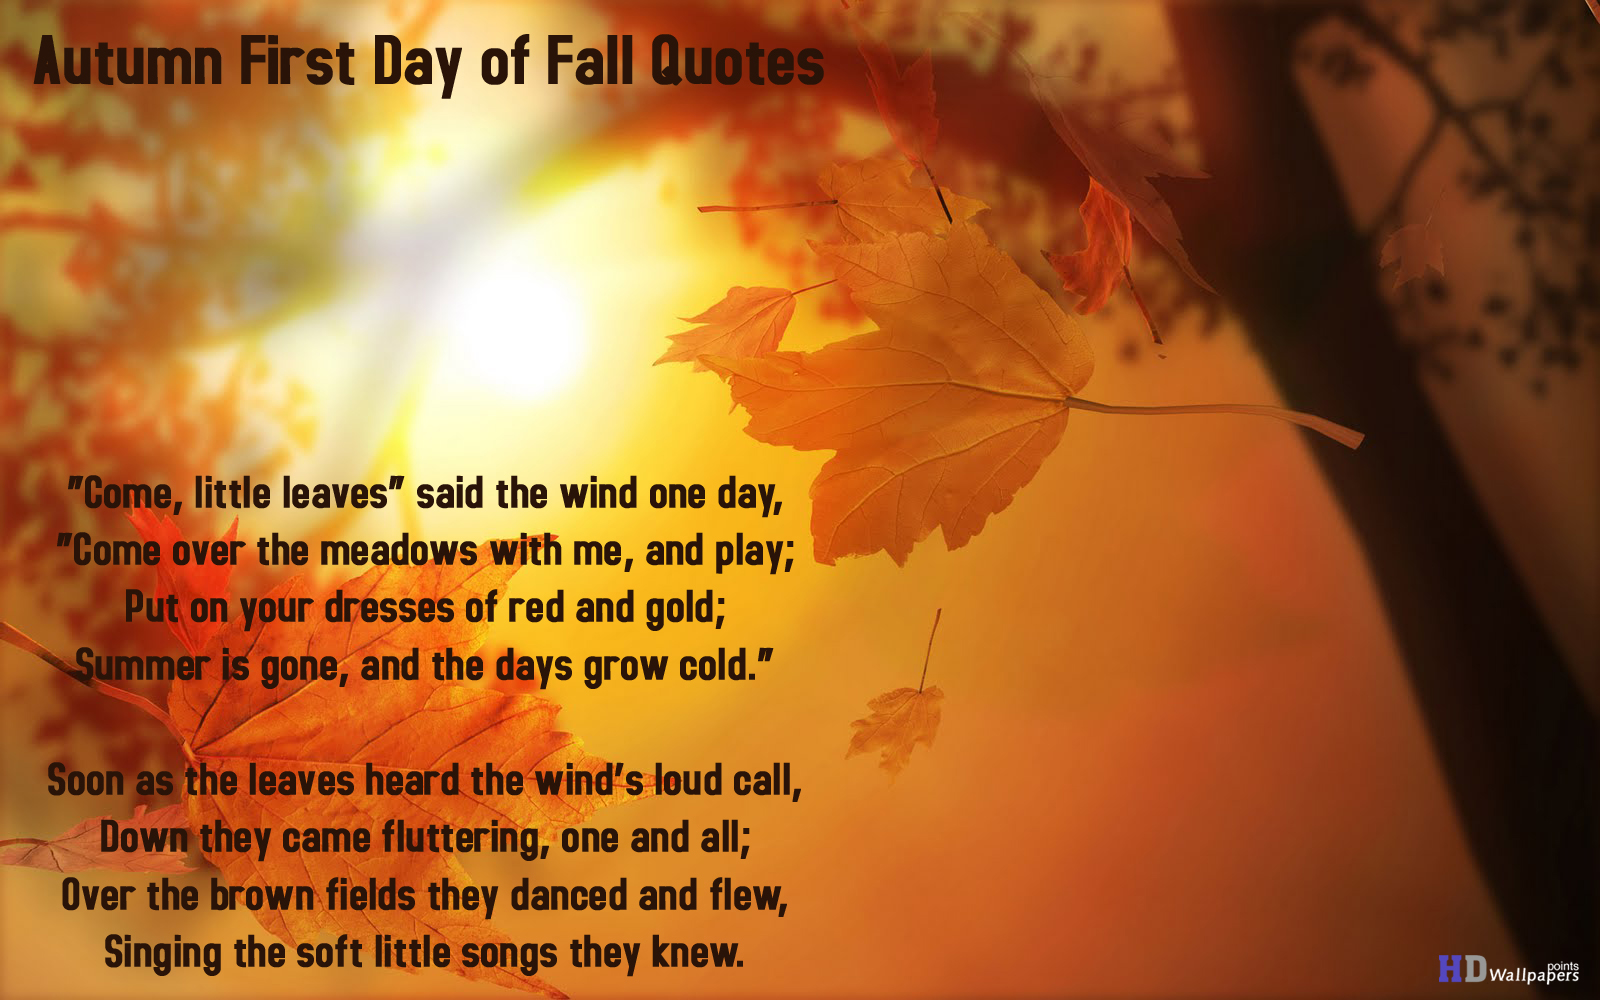 Fall quote #4